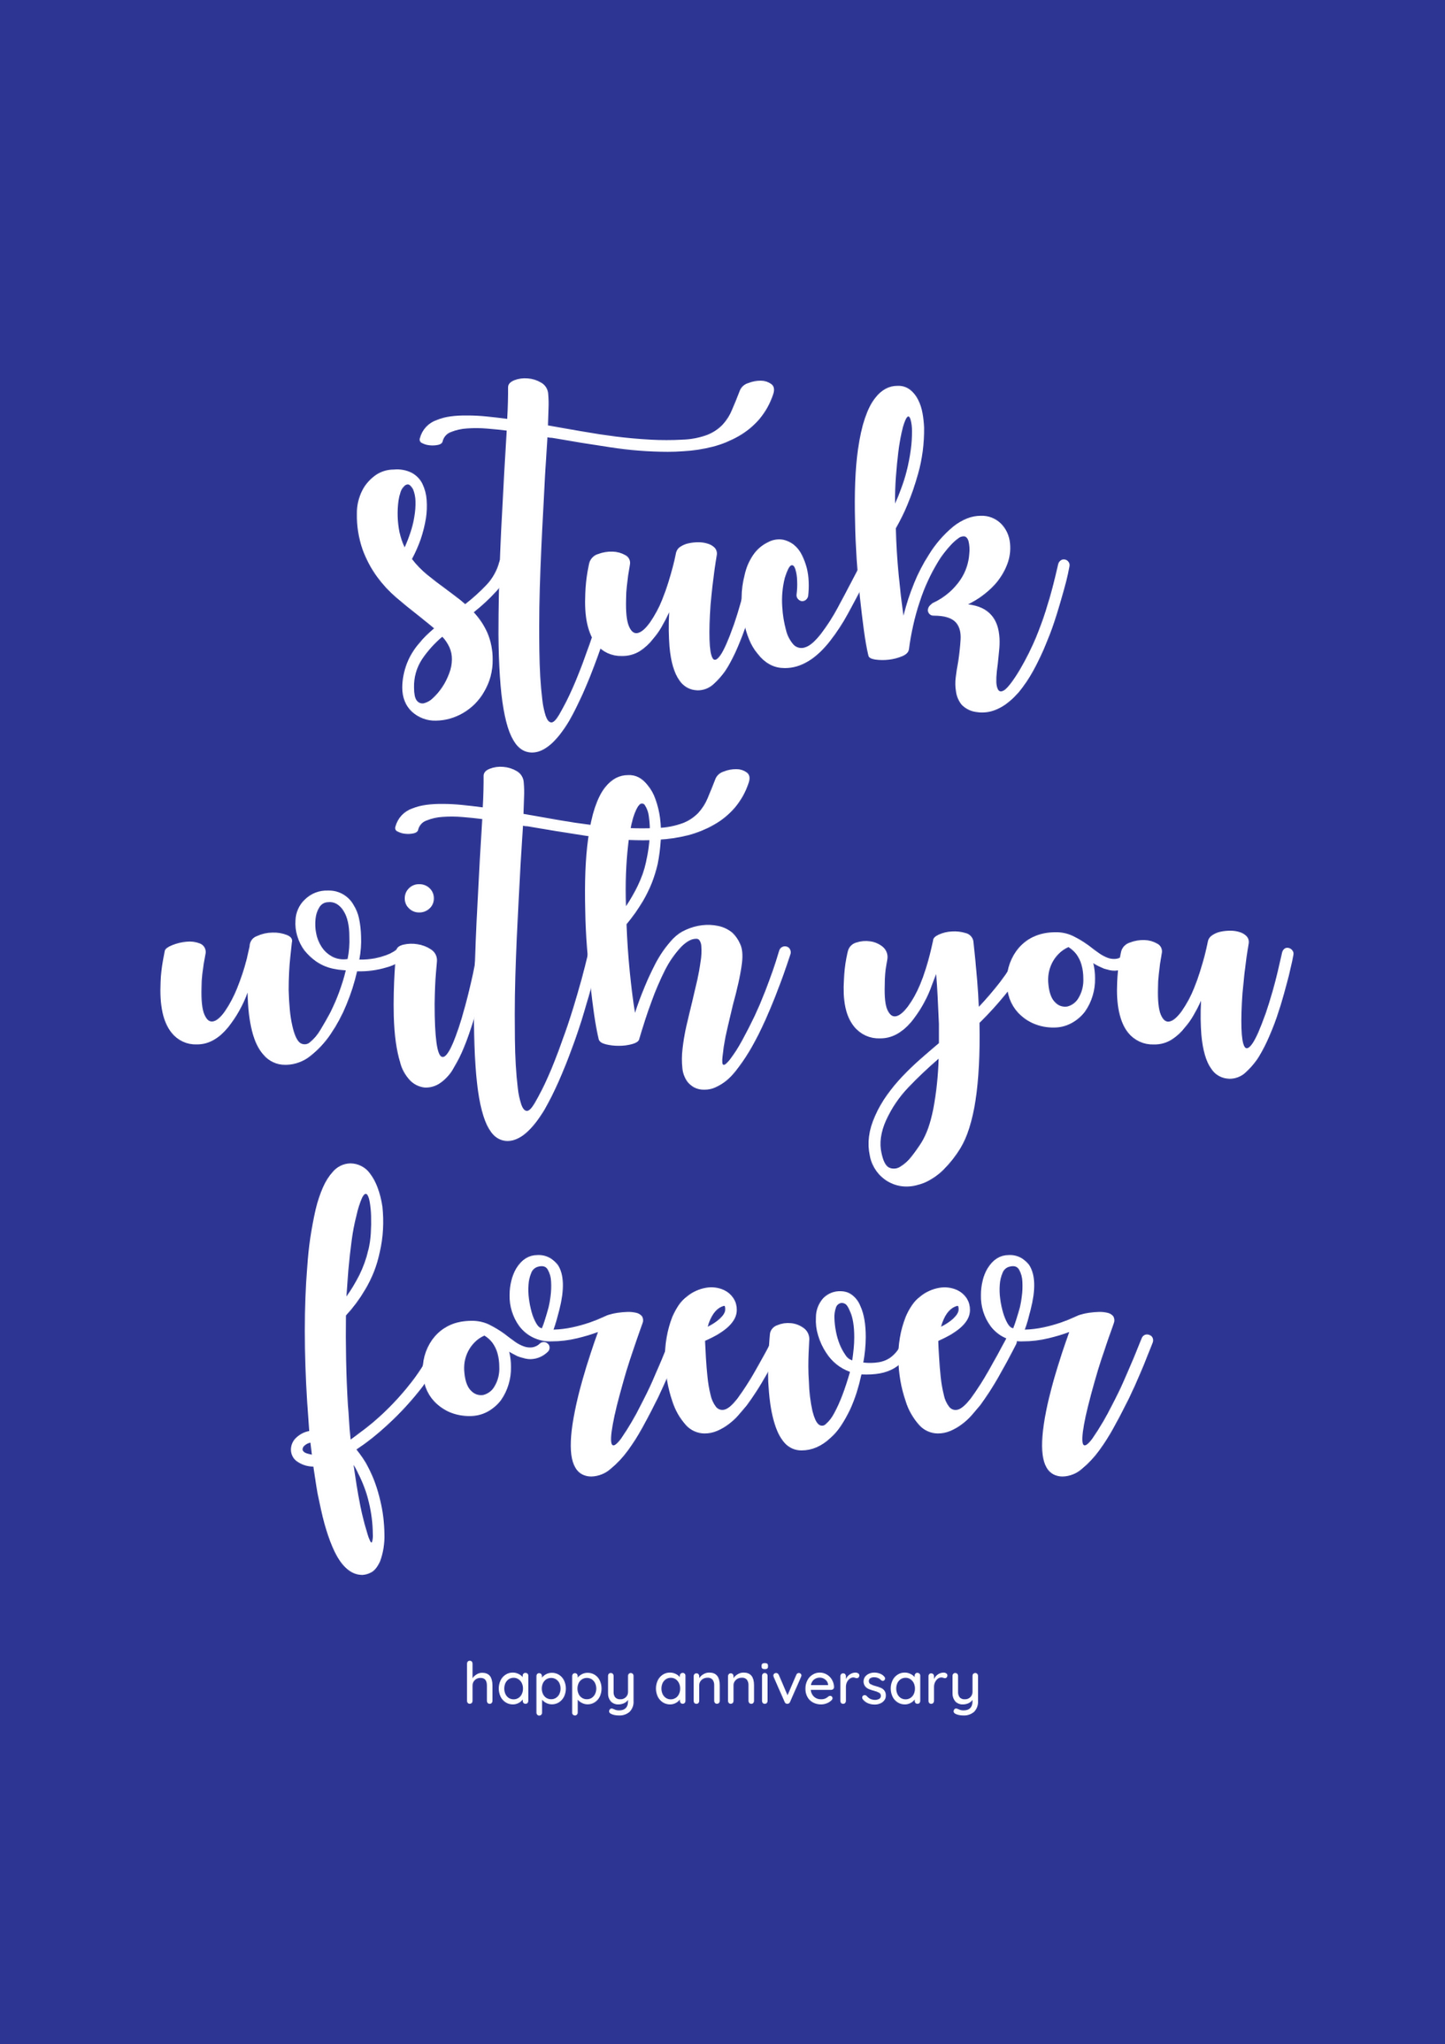 Stuck With You Forever - Happy Anniversary Greeting Card